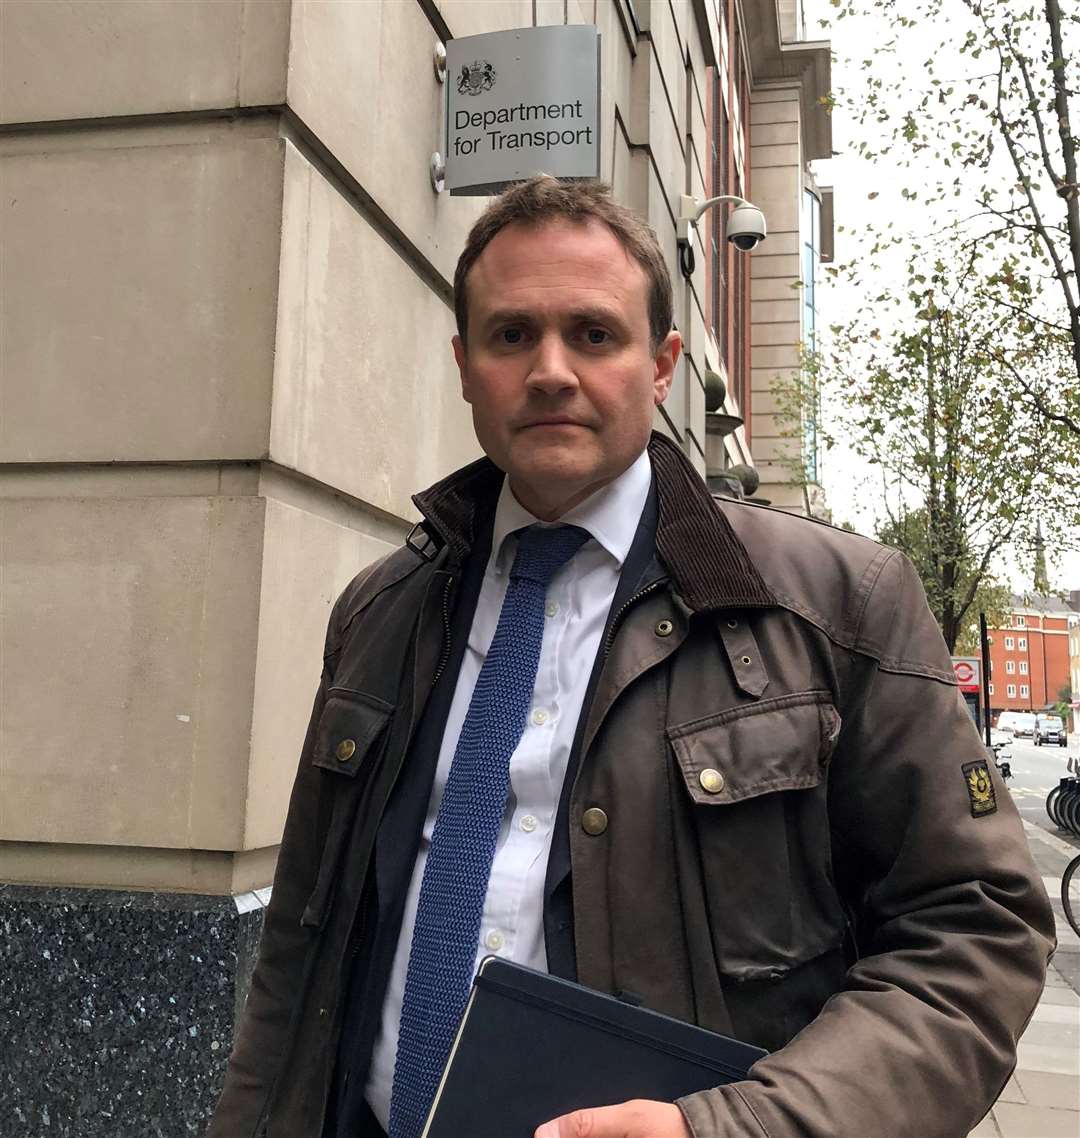 Tonbridge and Malling MP Tom Tugendhat is hoping to secure support for his leadership bid.